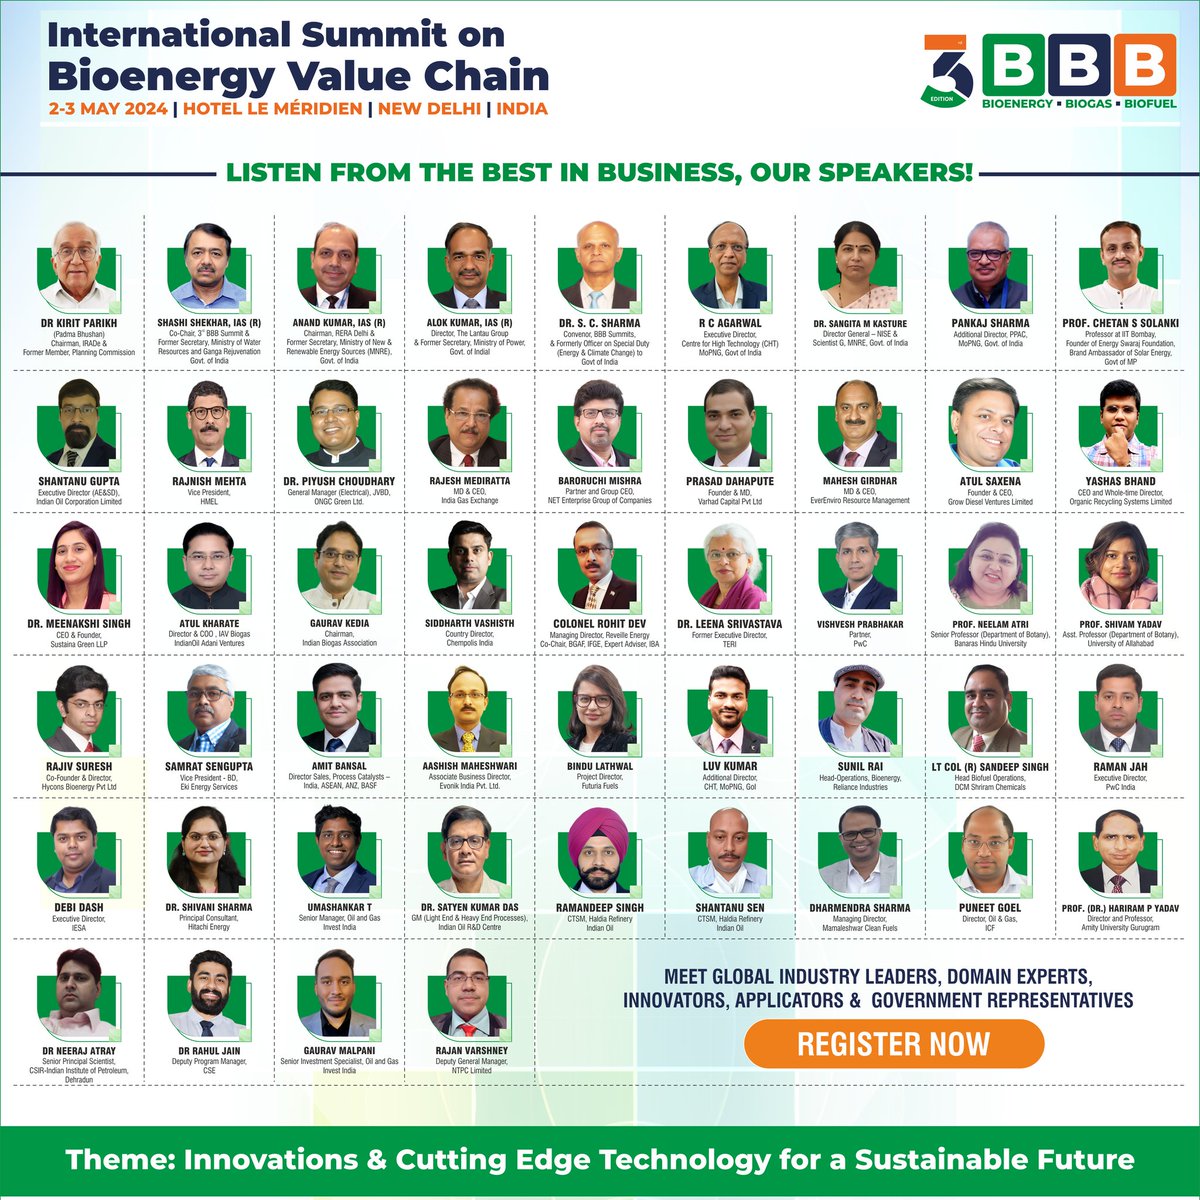 Bharat has accelerated its Energy Transition towards #NetZero2070 with much focus on Bioenergy including Biofuels This Sunrise Renewable Energy Sector seeks due focus and offers ample opportunities in R&D, Technology, Logistics, Manufacturing and more @bbbsummits is organising…